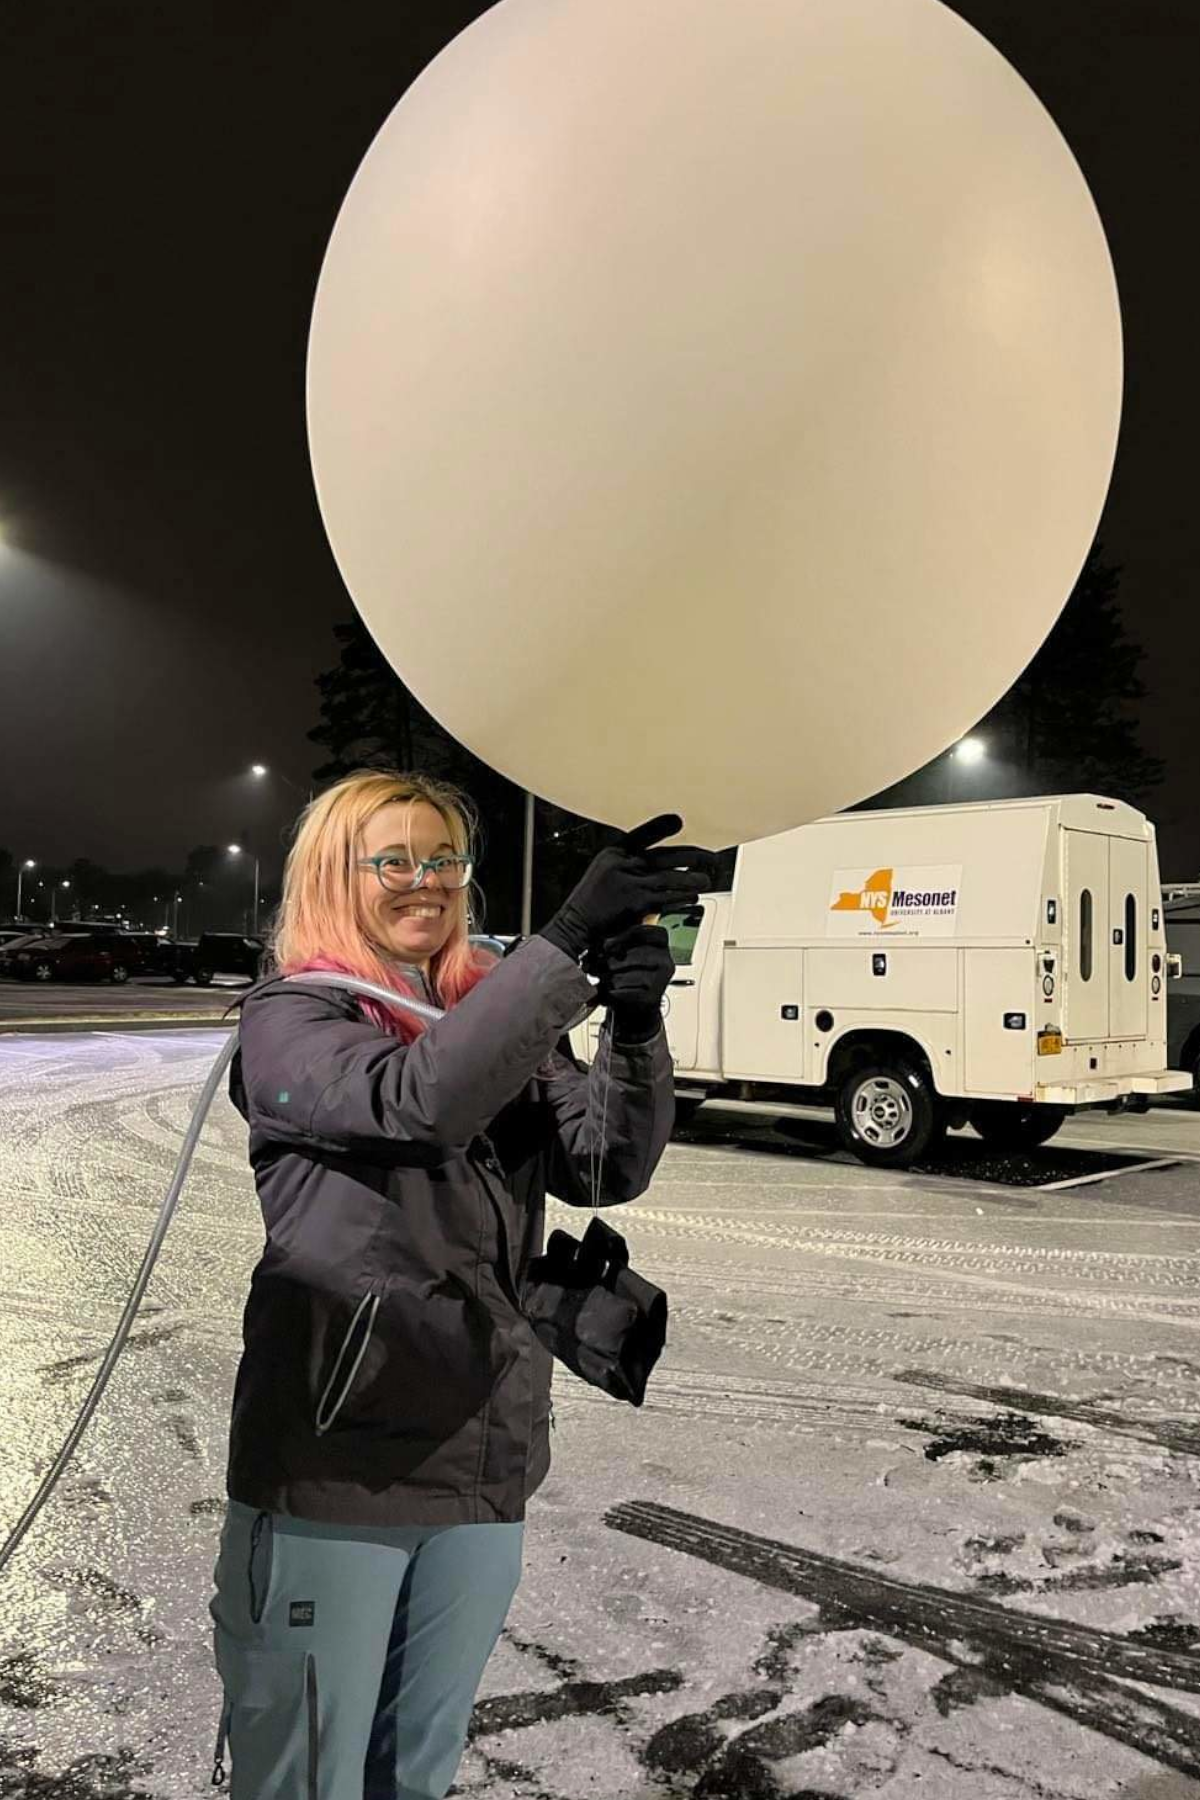 Erin Potter holding large white weather balloon, outside, smiling